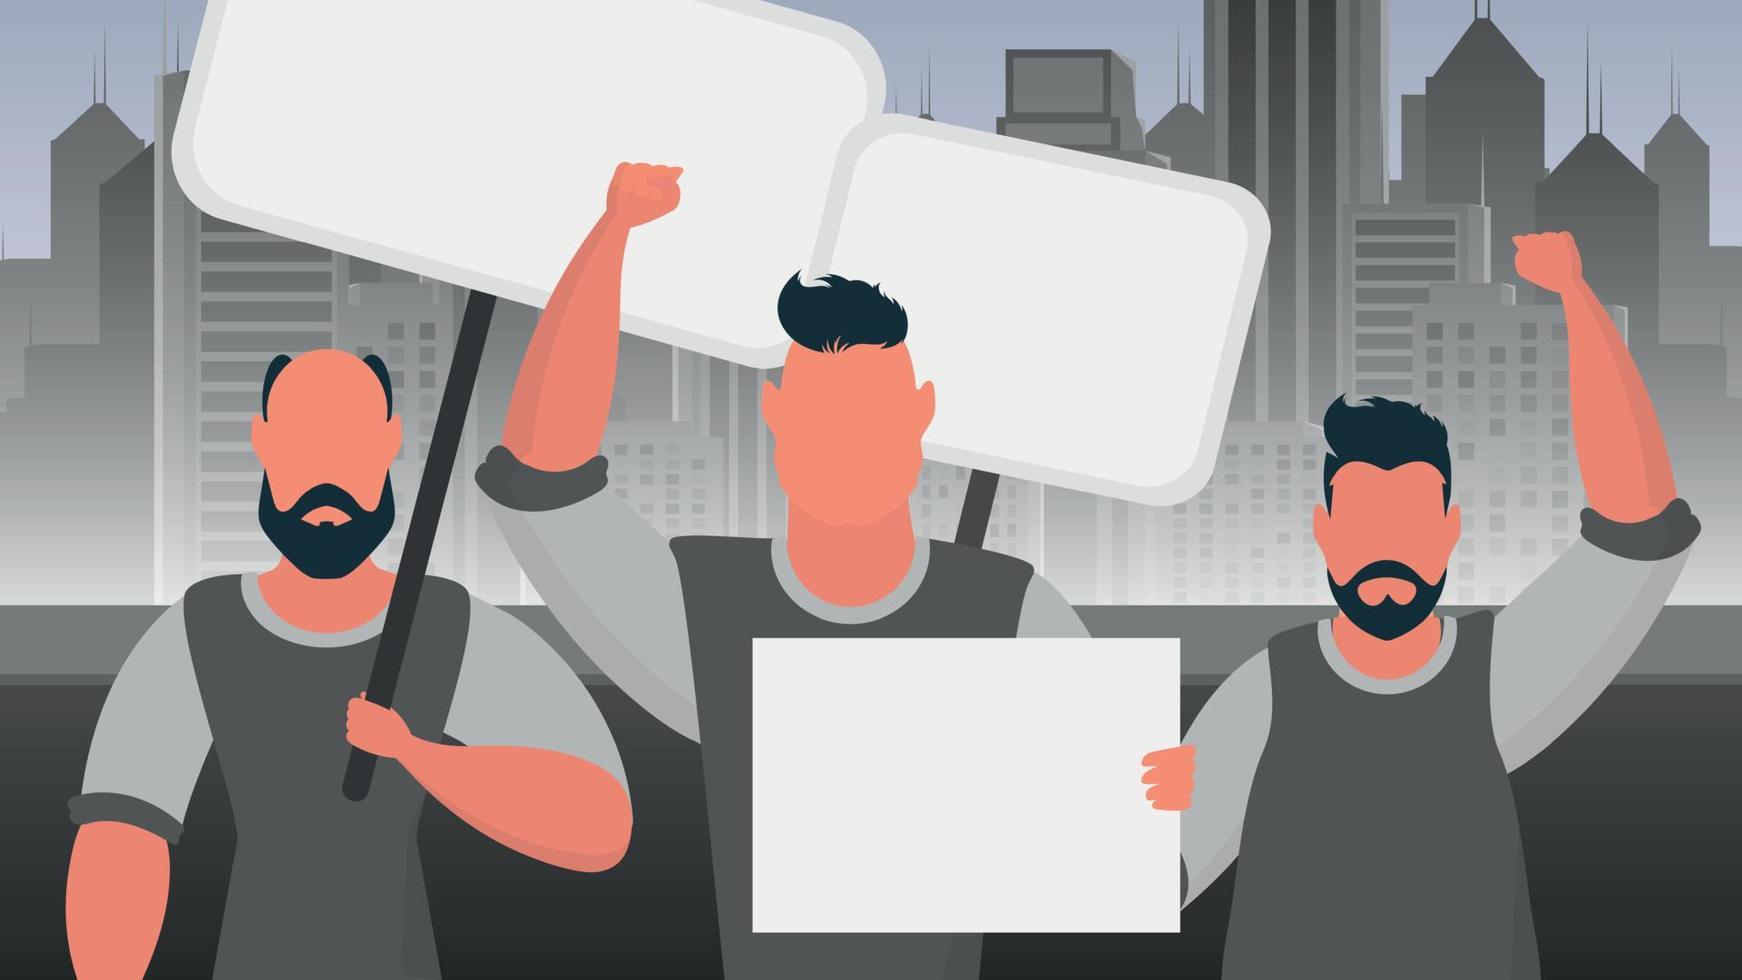 A group of men with a banner in their hands against the backdrop of the city. Protest concept. Vector illustration. Cartoon style.